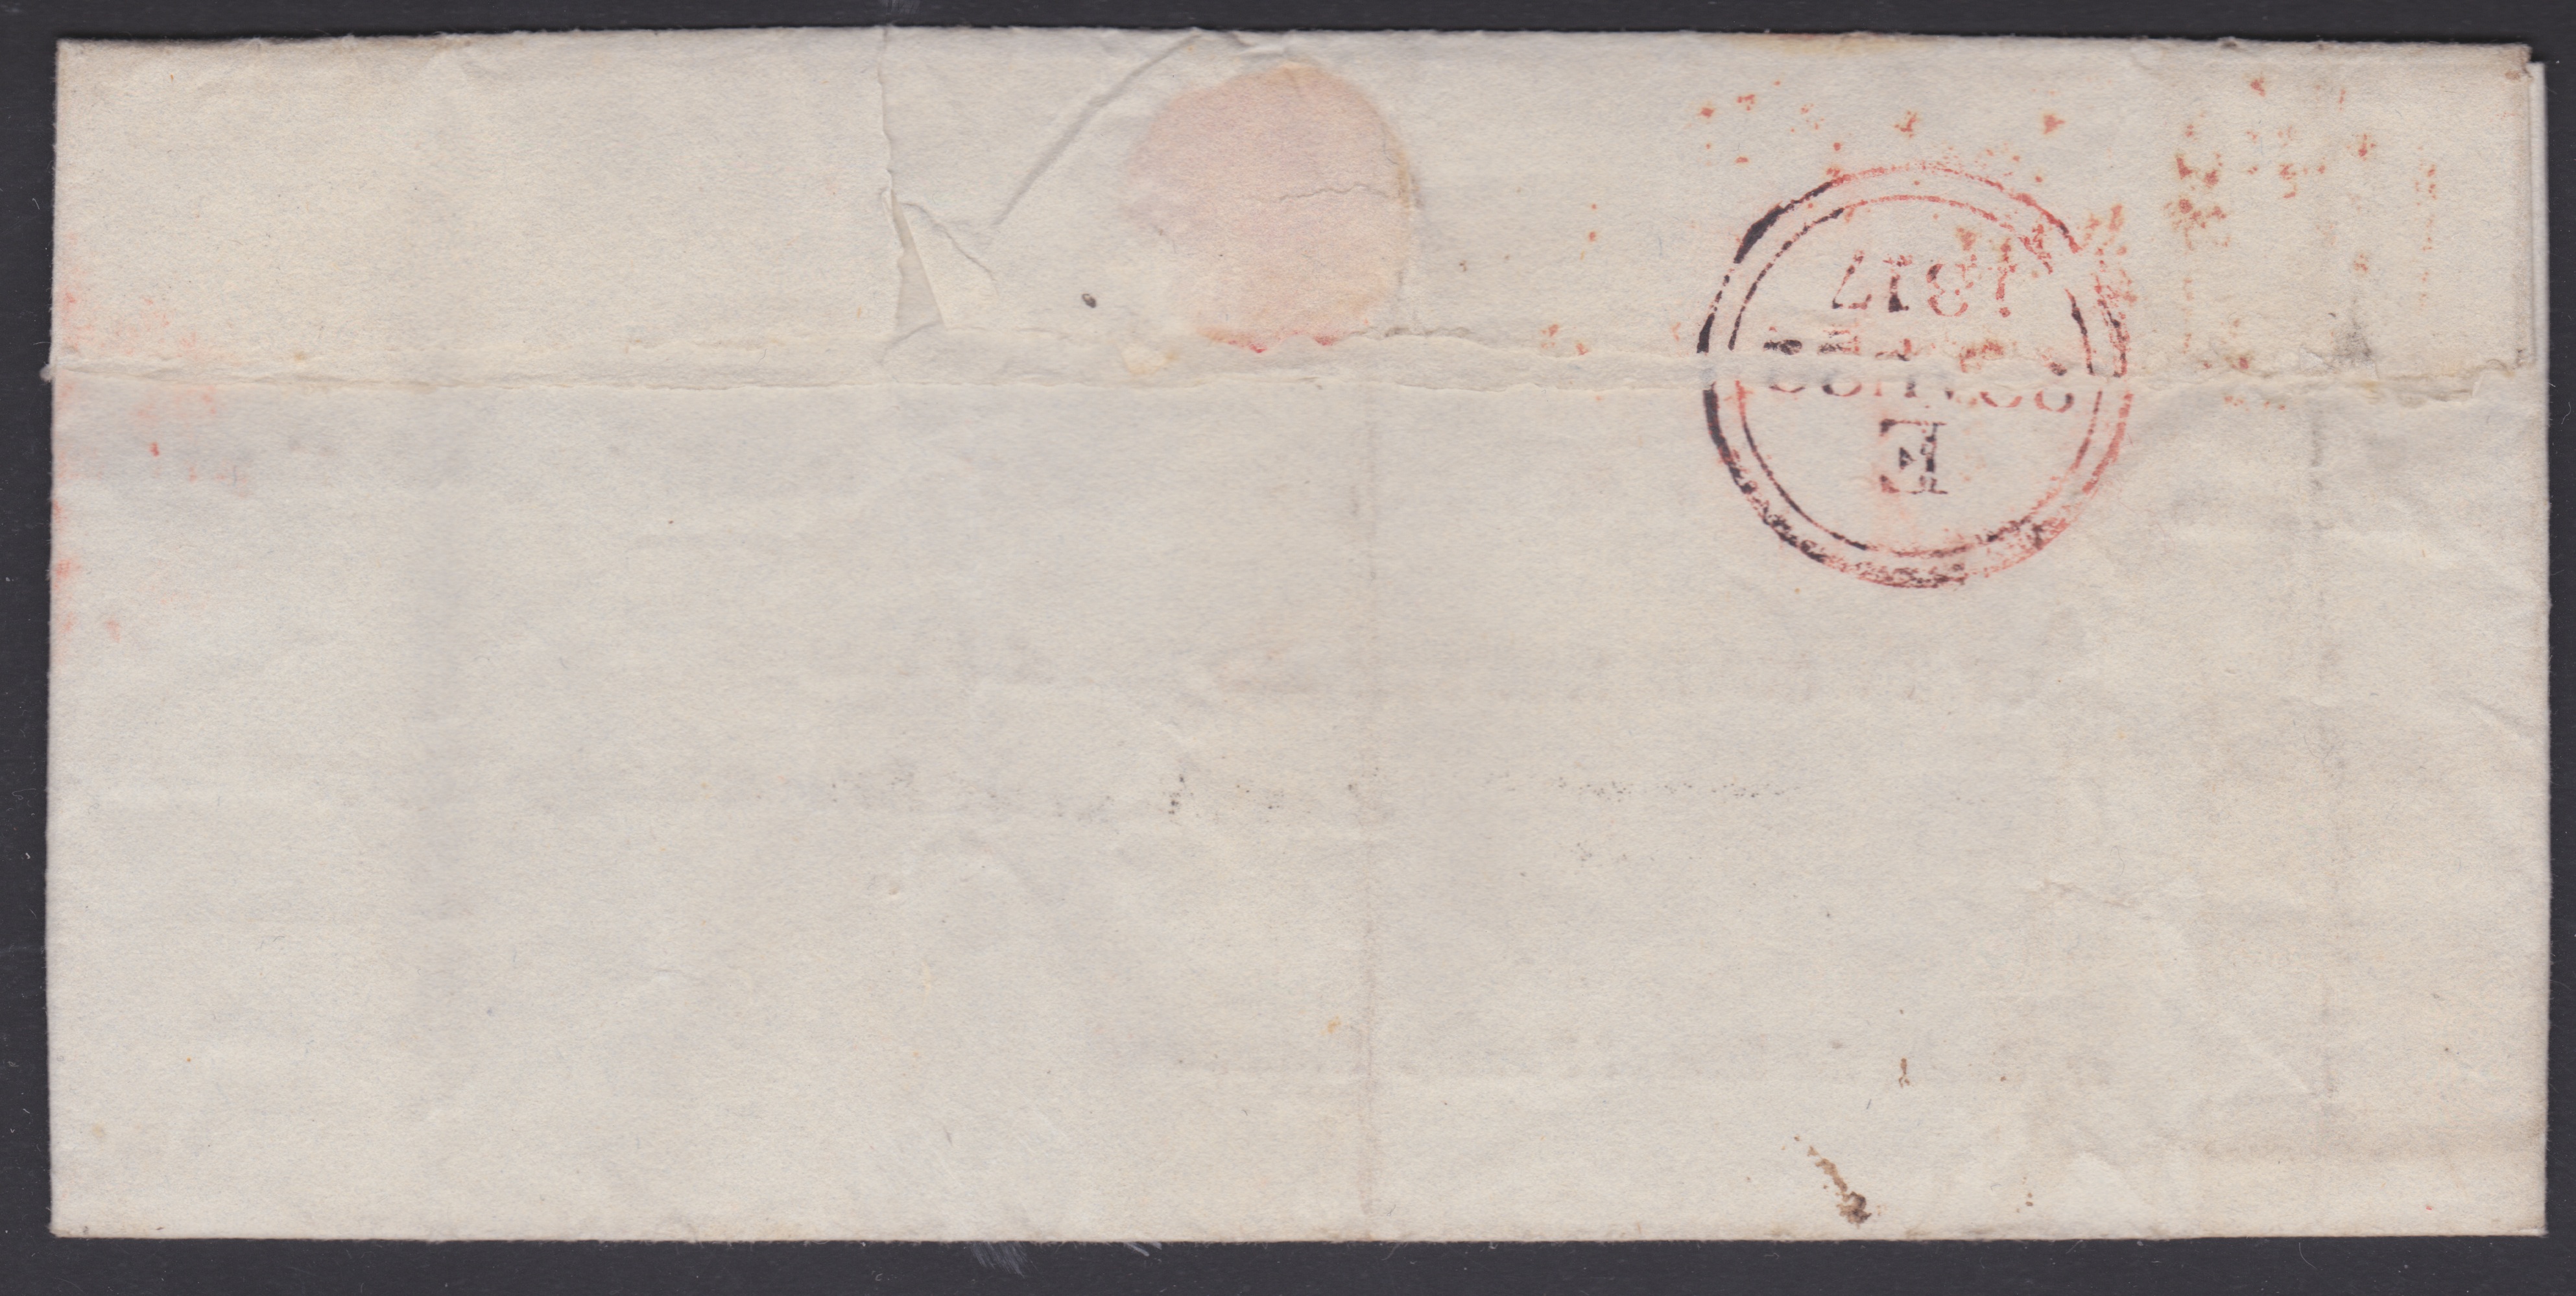 INDIA / LONDON / G.B. SHIP LETTER 1817 - Printed Bill of Exchange for £103.2.4 from the East India